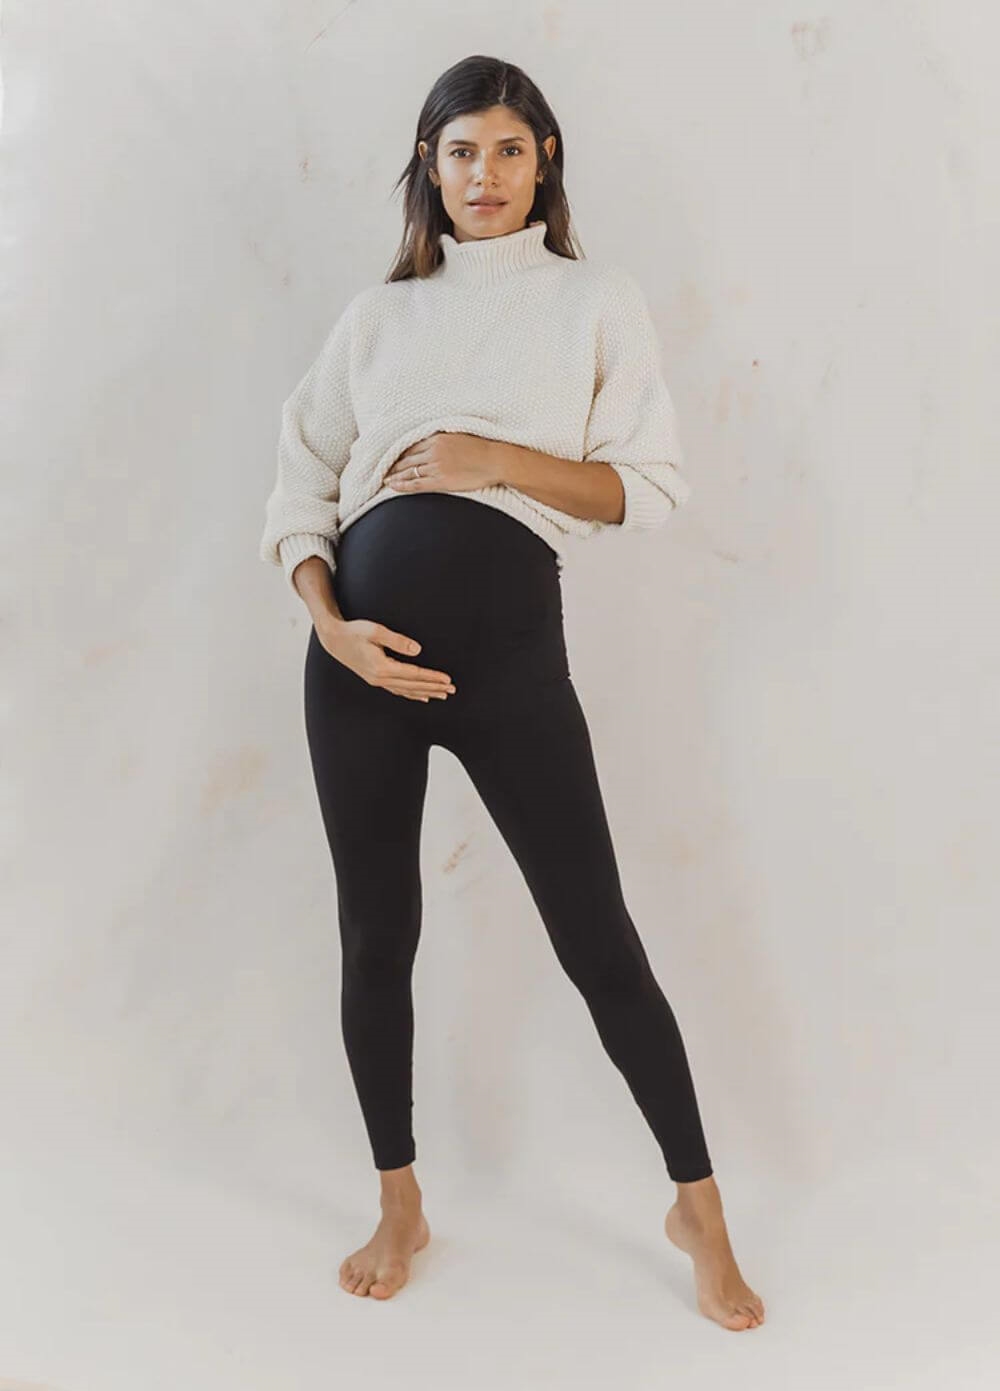 BLANQI Maternity Leggings, Over The Belly Pregnancy Tights